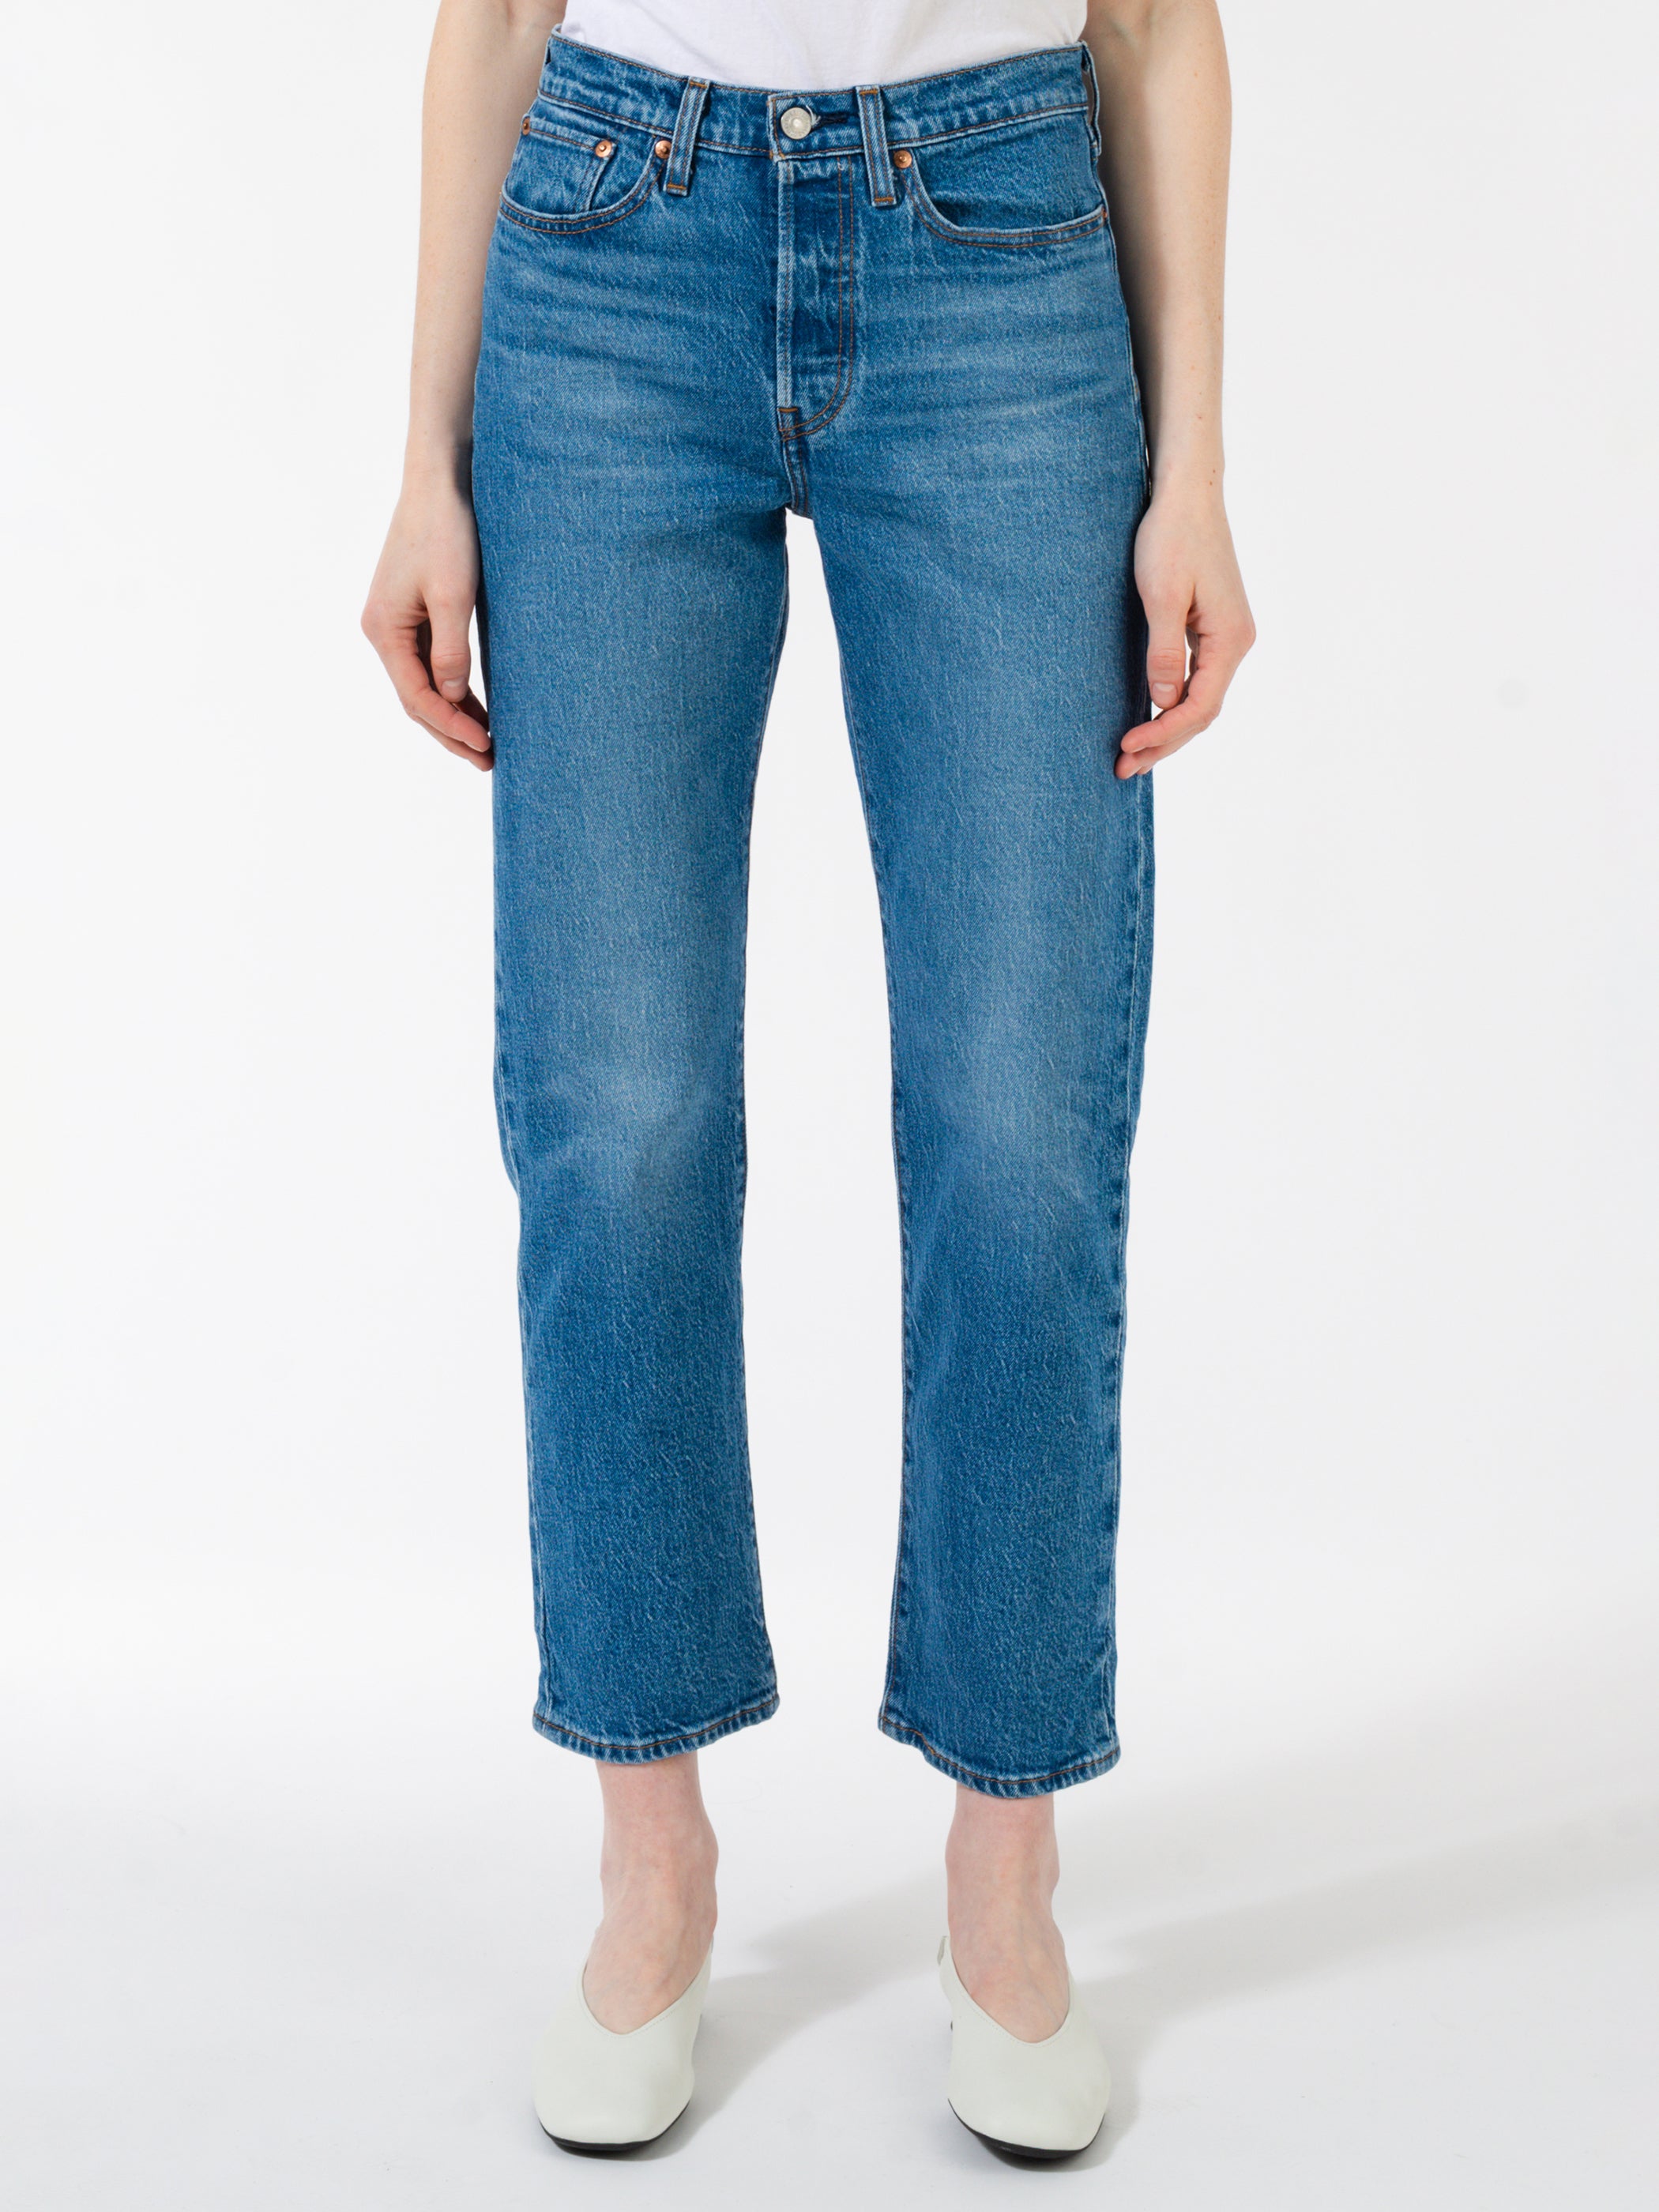 Levi's Wedgie Fit Straight Women's Jeans Sale